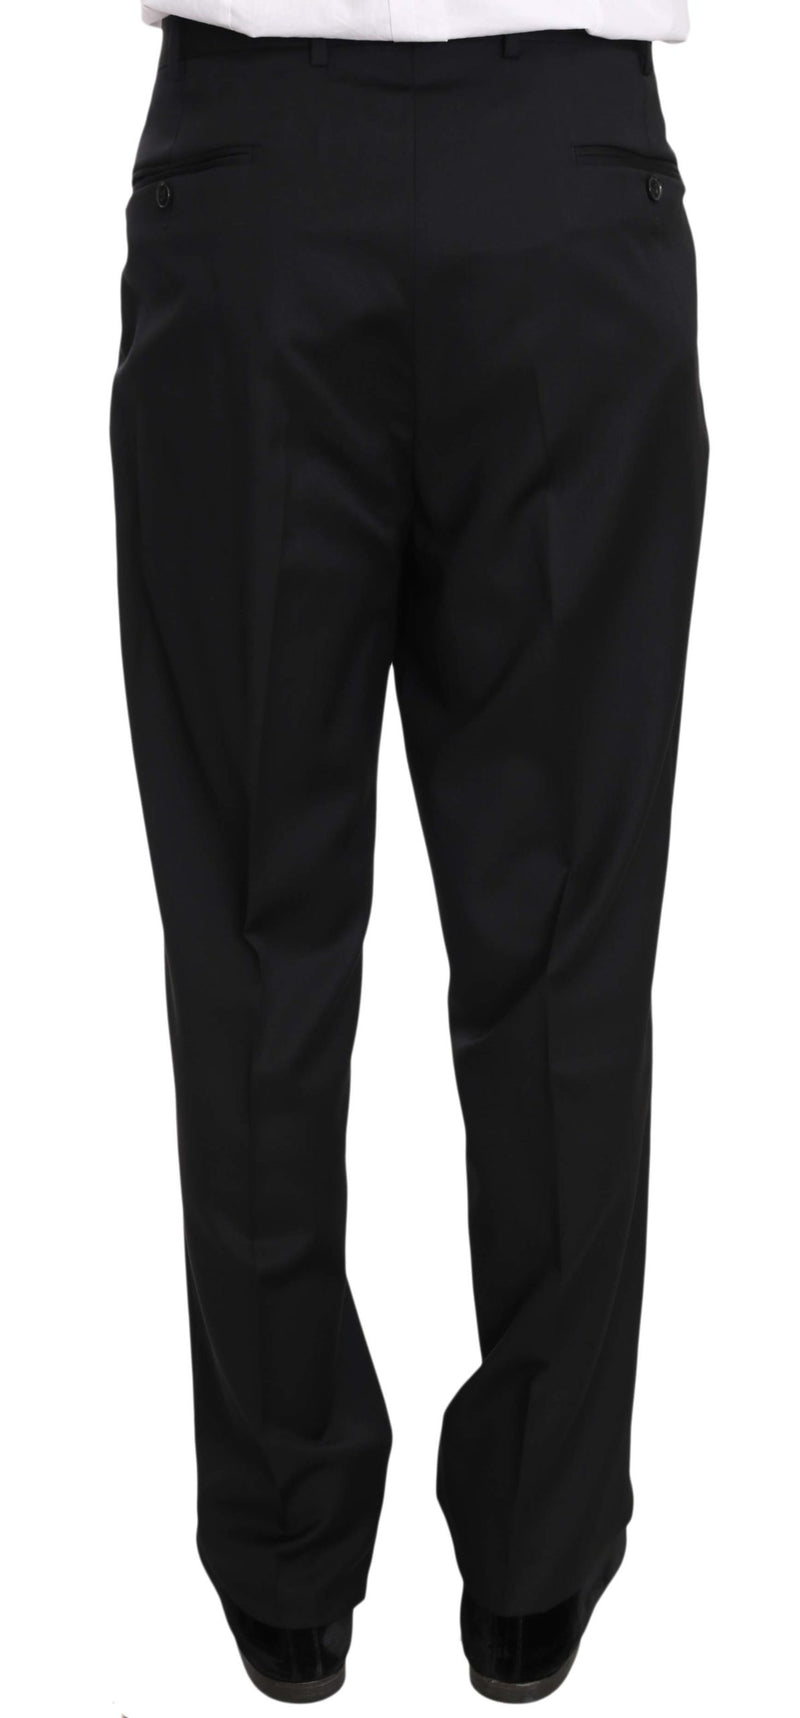 Black Two Piece 3 Button Wool Suit